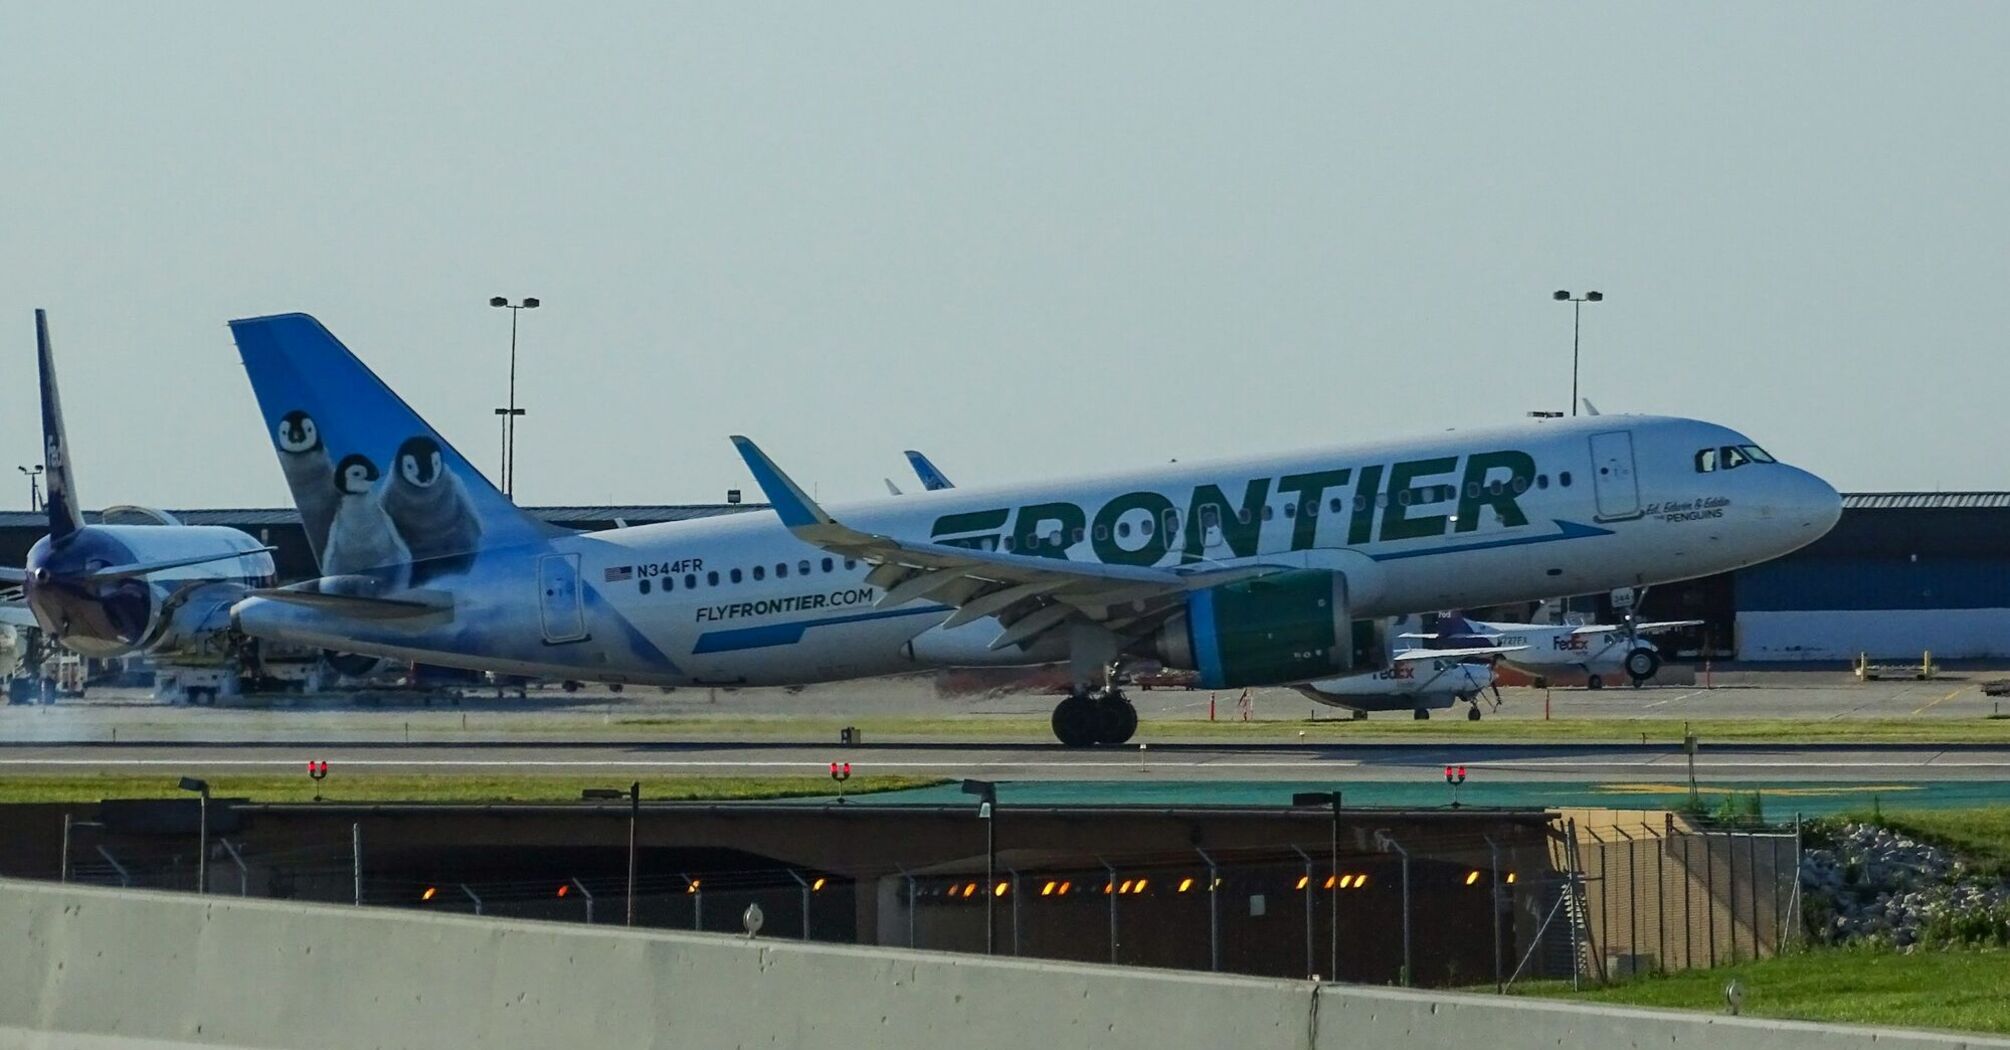 Frontier Airlines aircraft on tarmac with distinctive animal-themed tail art